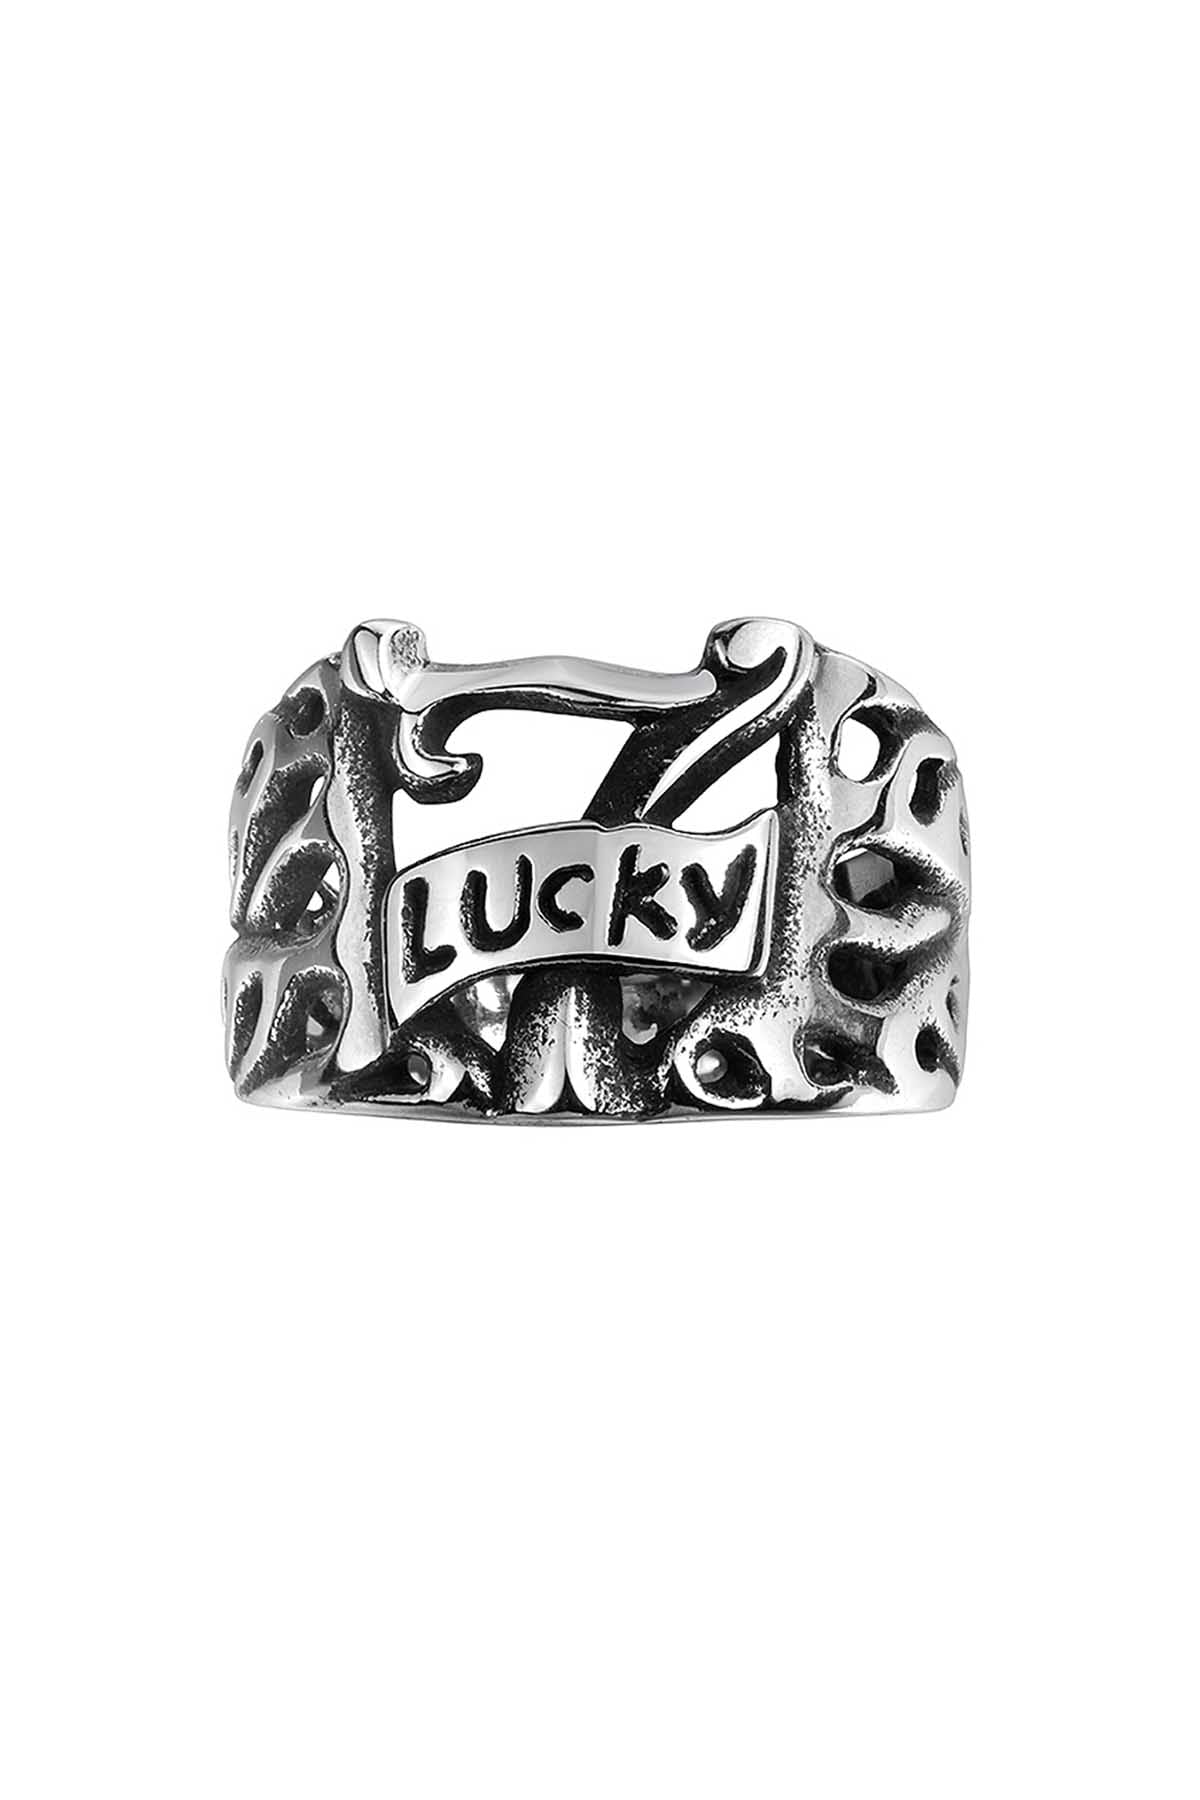 Gomaya Vintage Lucky 7 Stainless Steel Ring